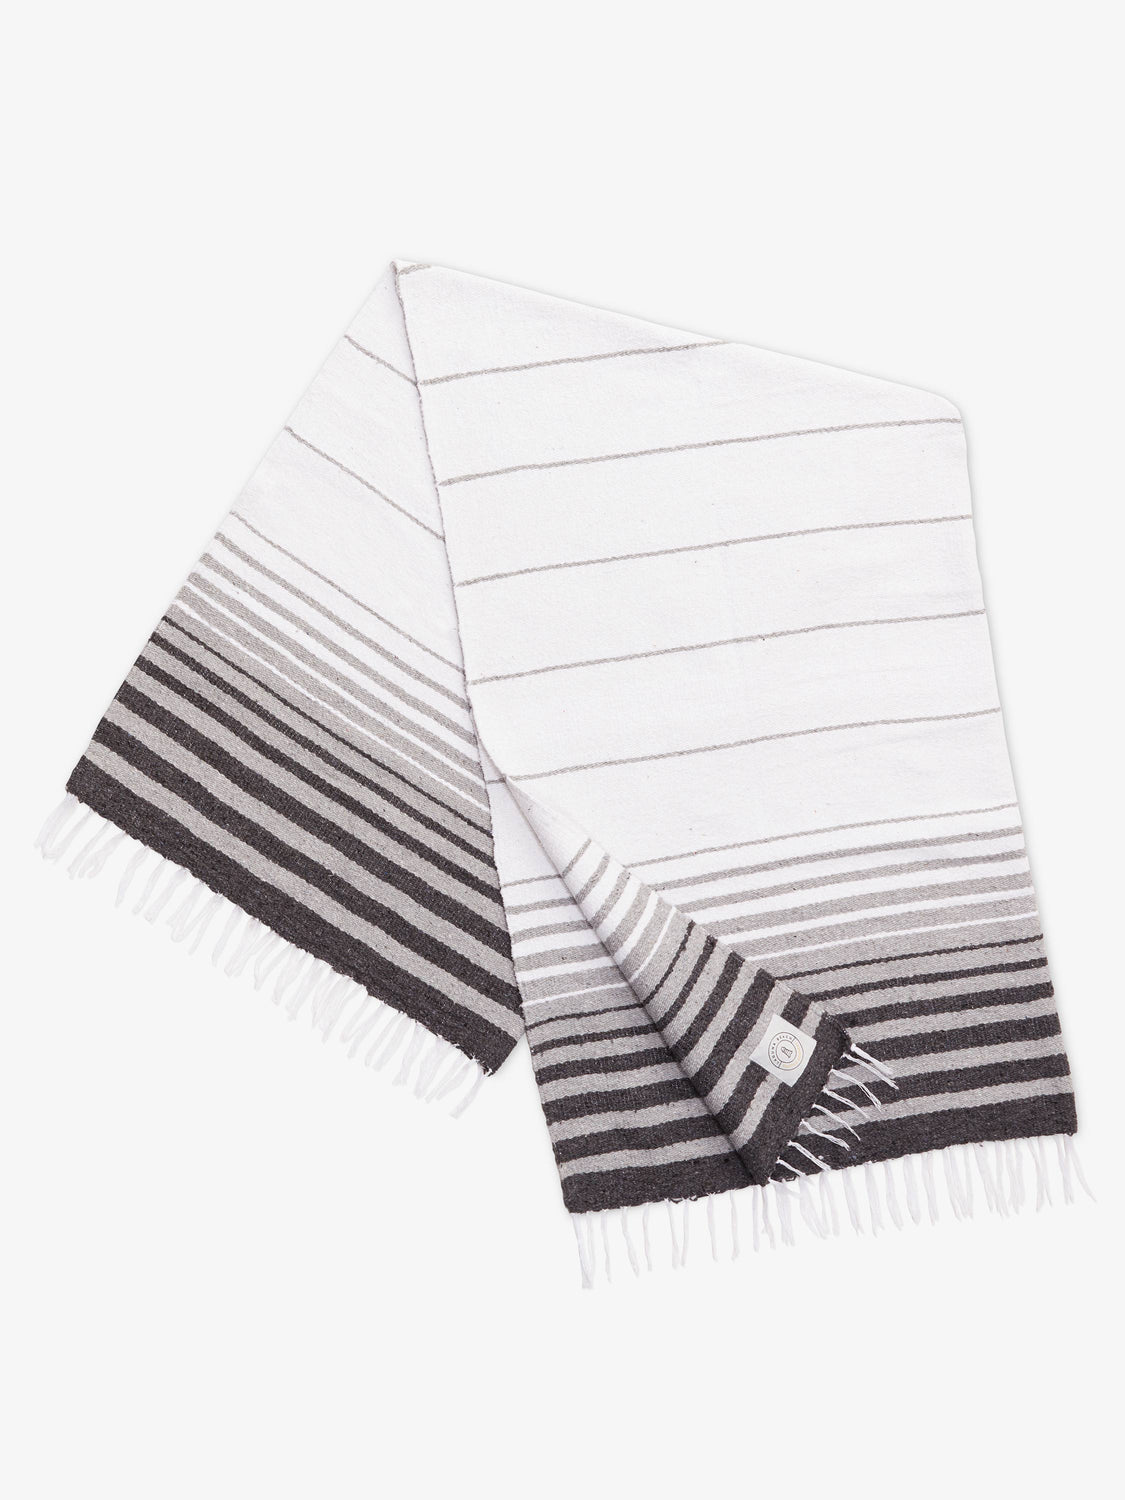 A folded traditional, hand-woven Mexican blanket in gray and white stripe pattern with fringe.